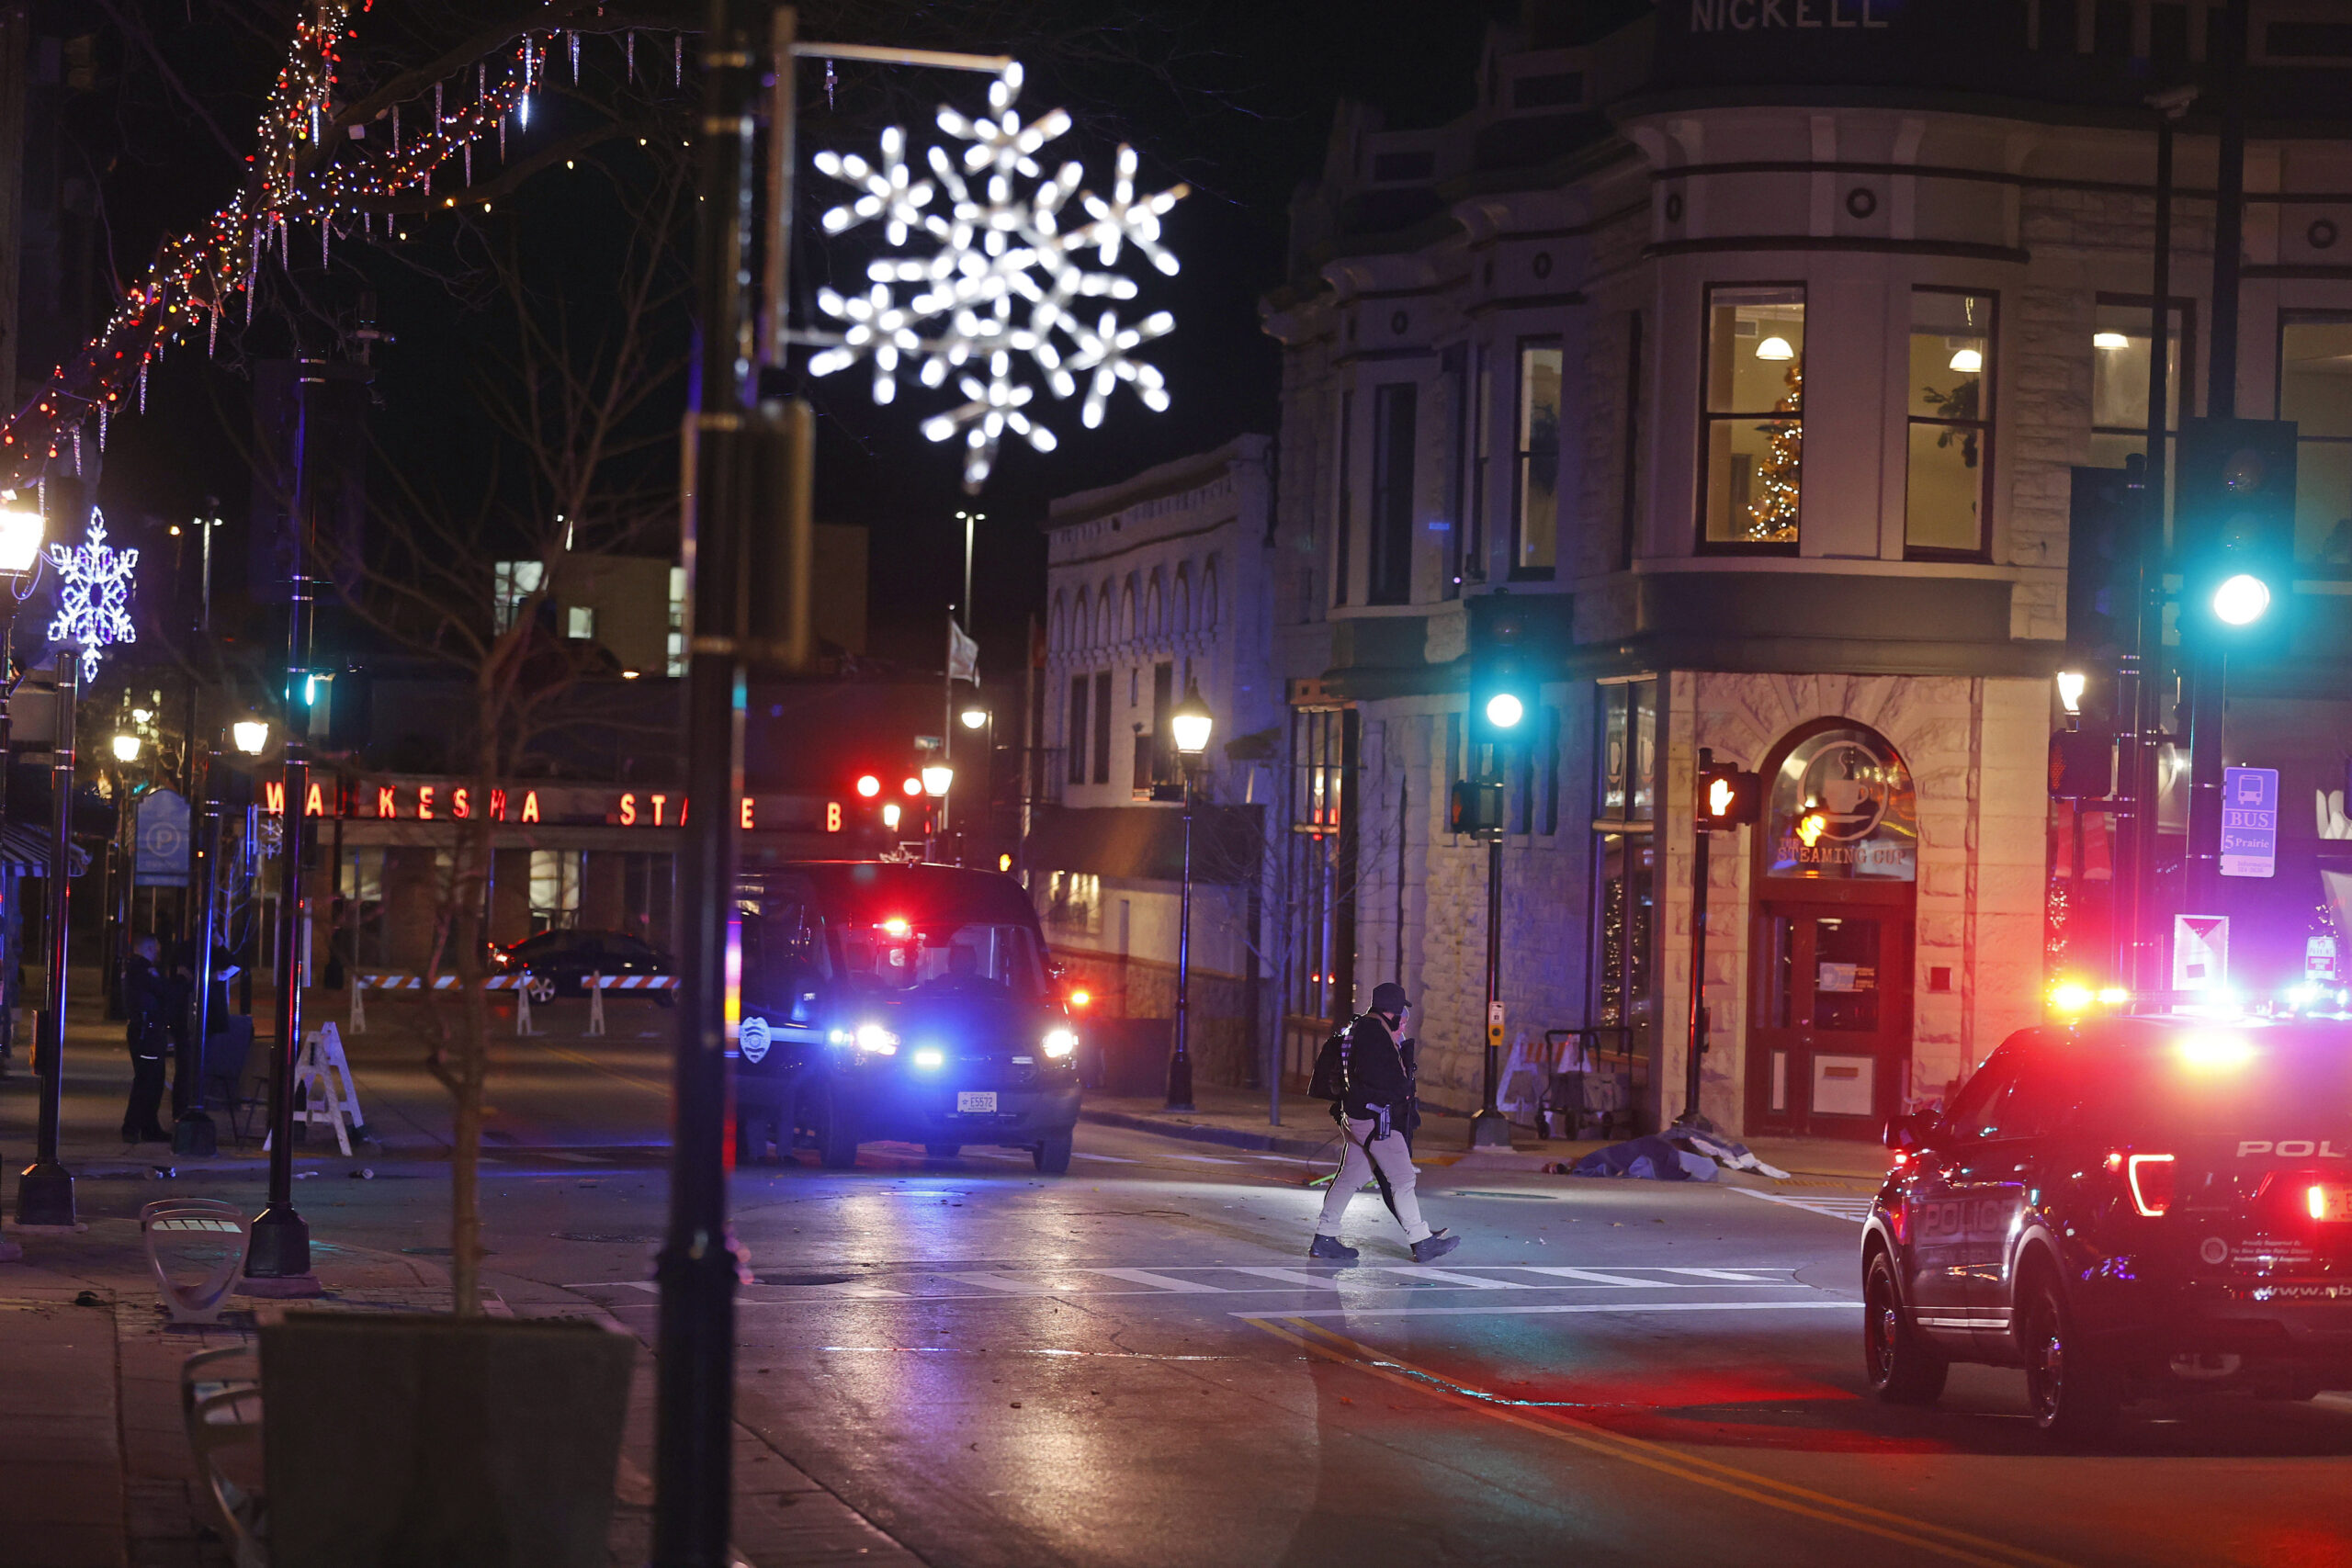 Police canvass the streets in downtown Waukesha after a vehicle plowed into a Christmas parade